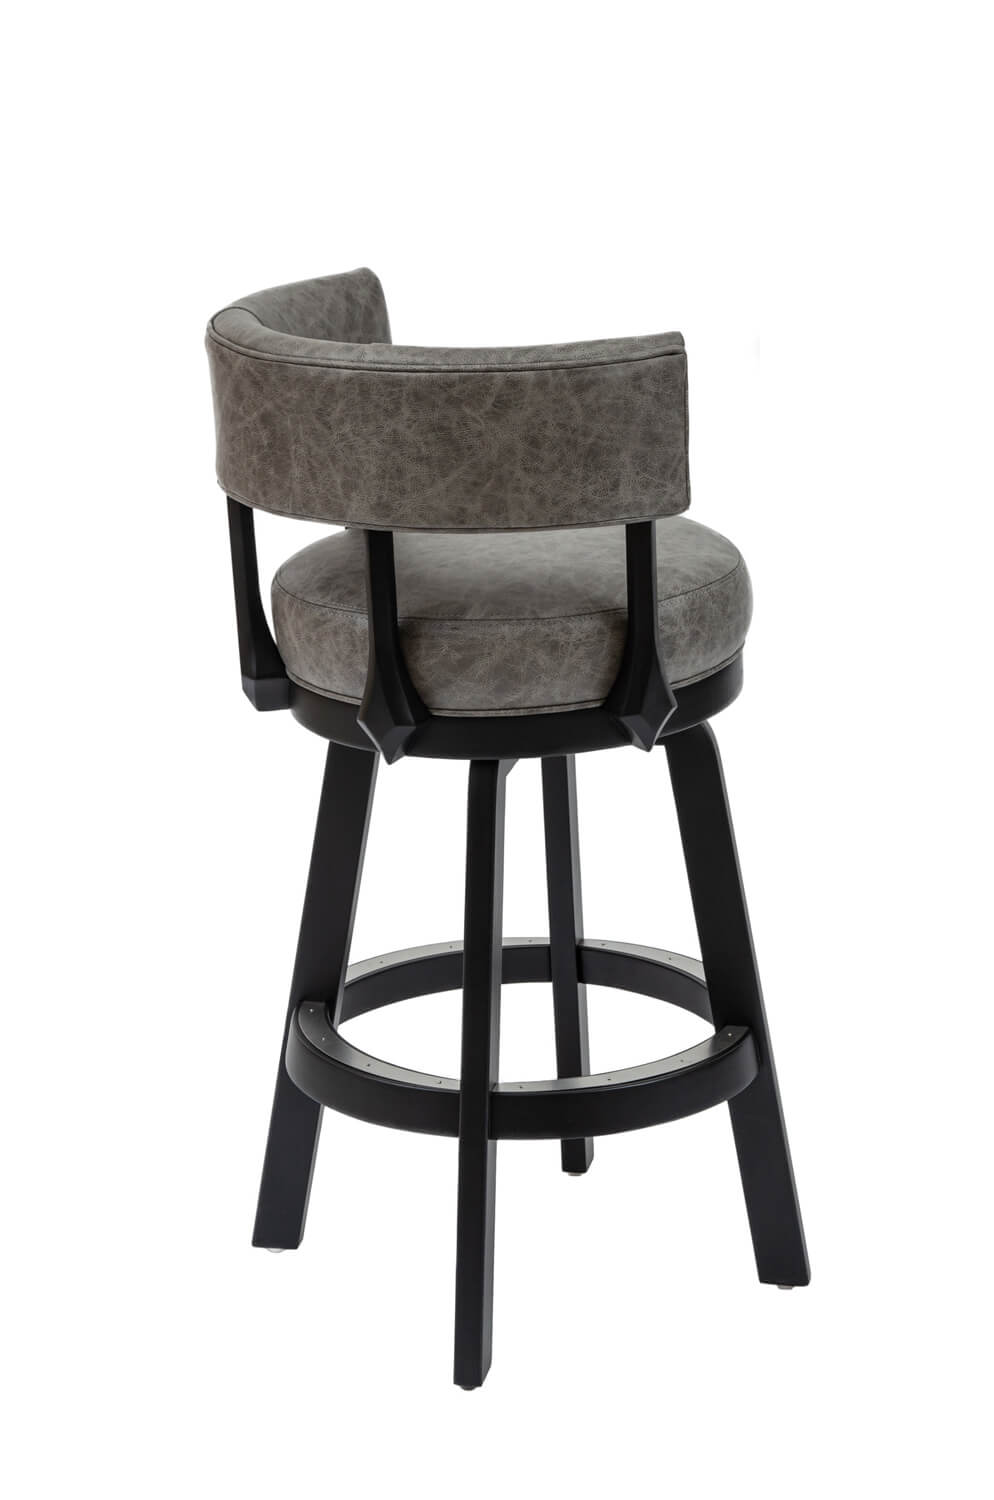 Darafeev S Ace Wood Swivel Stool W, Leather Swivel Bar Stools With Back